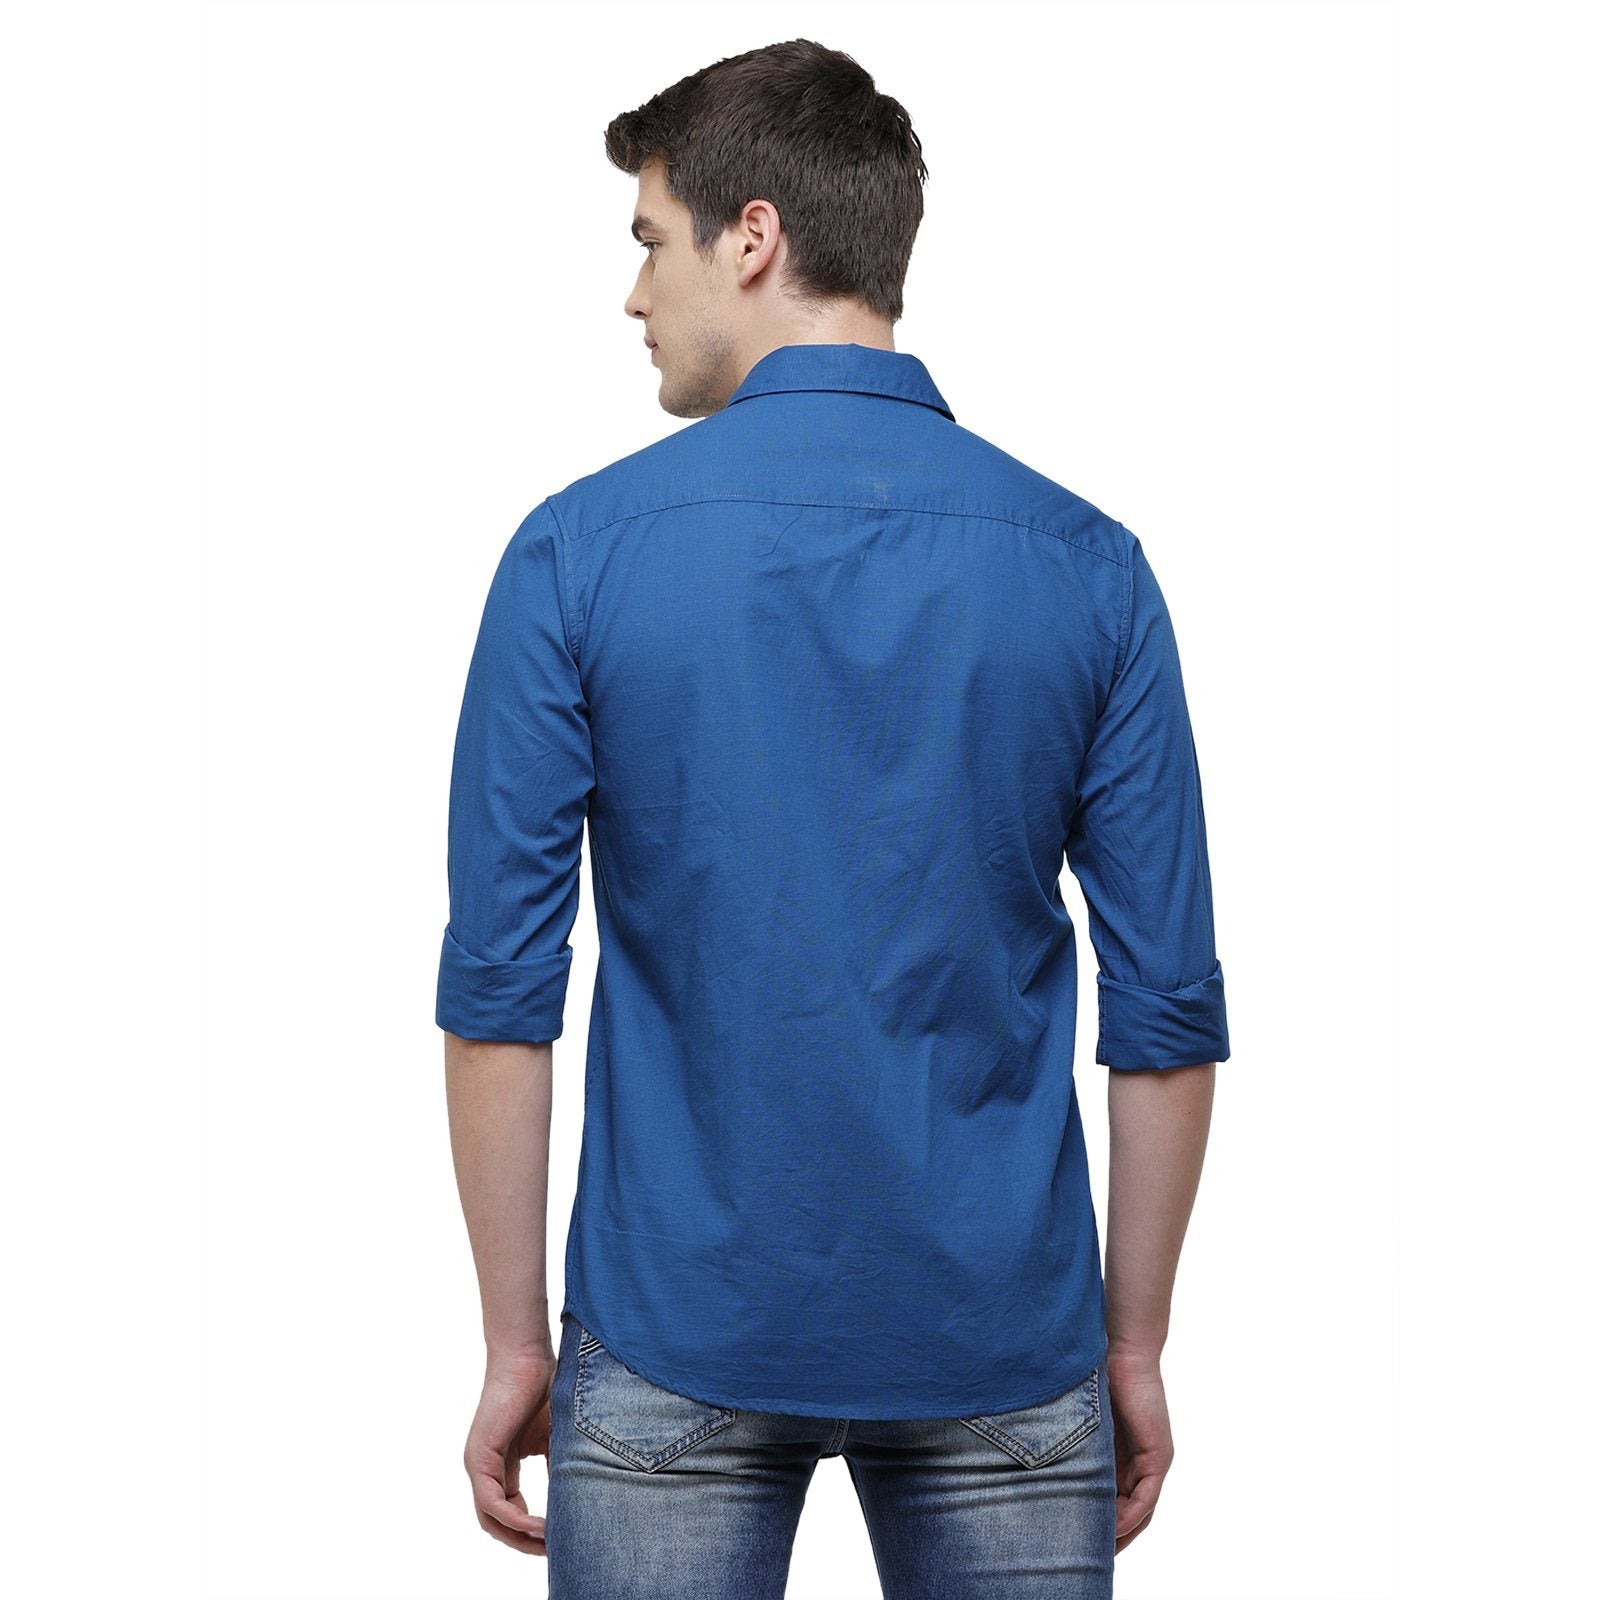 Classic Polo Men's Smart Fit Collar Neck Full Sleeve Solid Cotton Royal Blue Woven Shirt SM1-69 H-FS-SLD-SF Shirts Classic Polo 